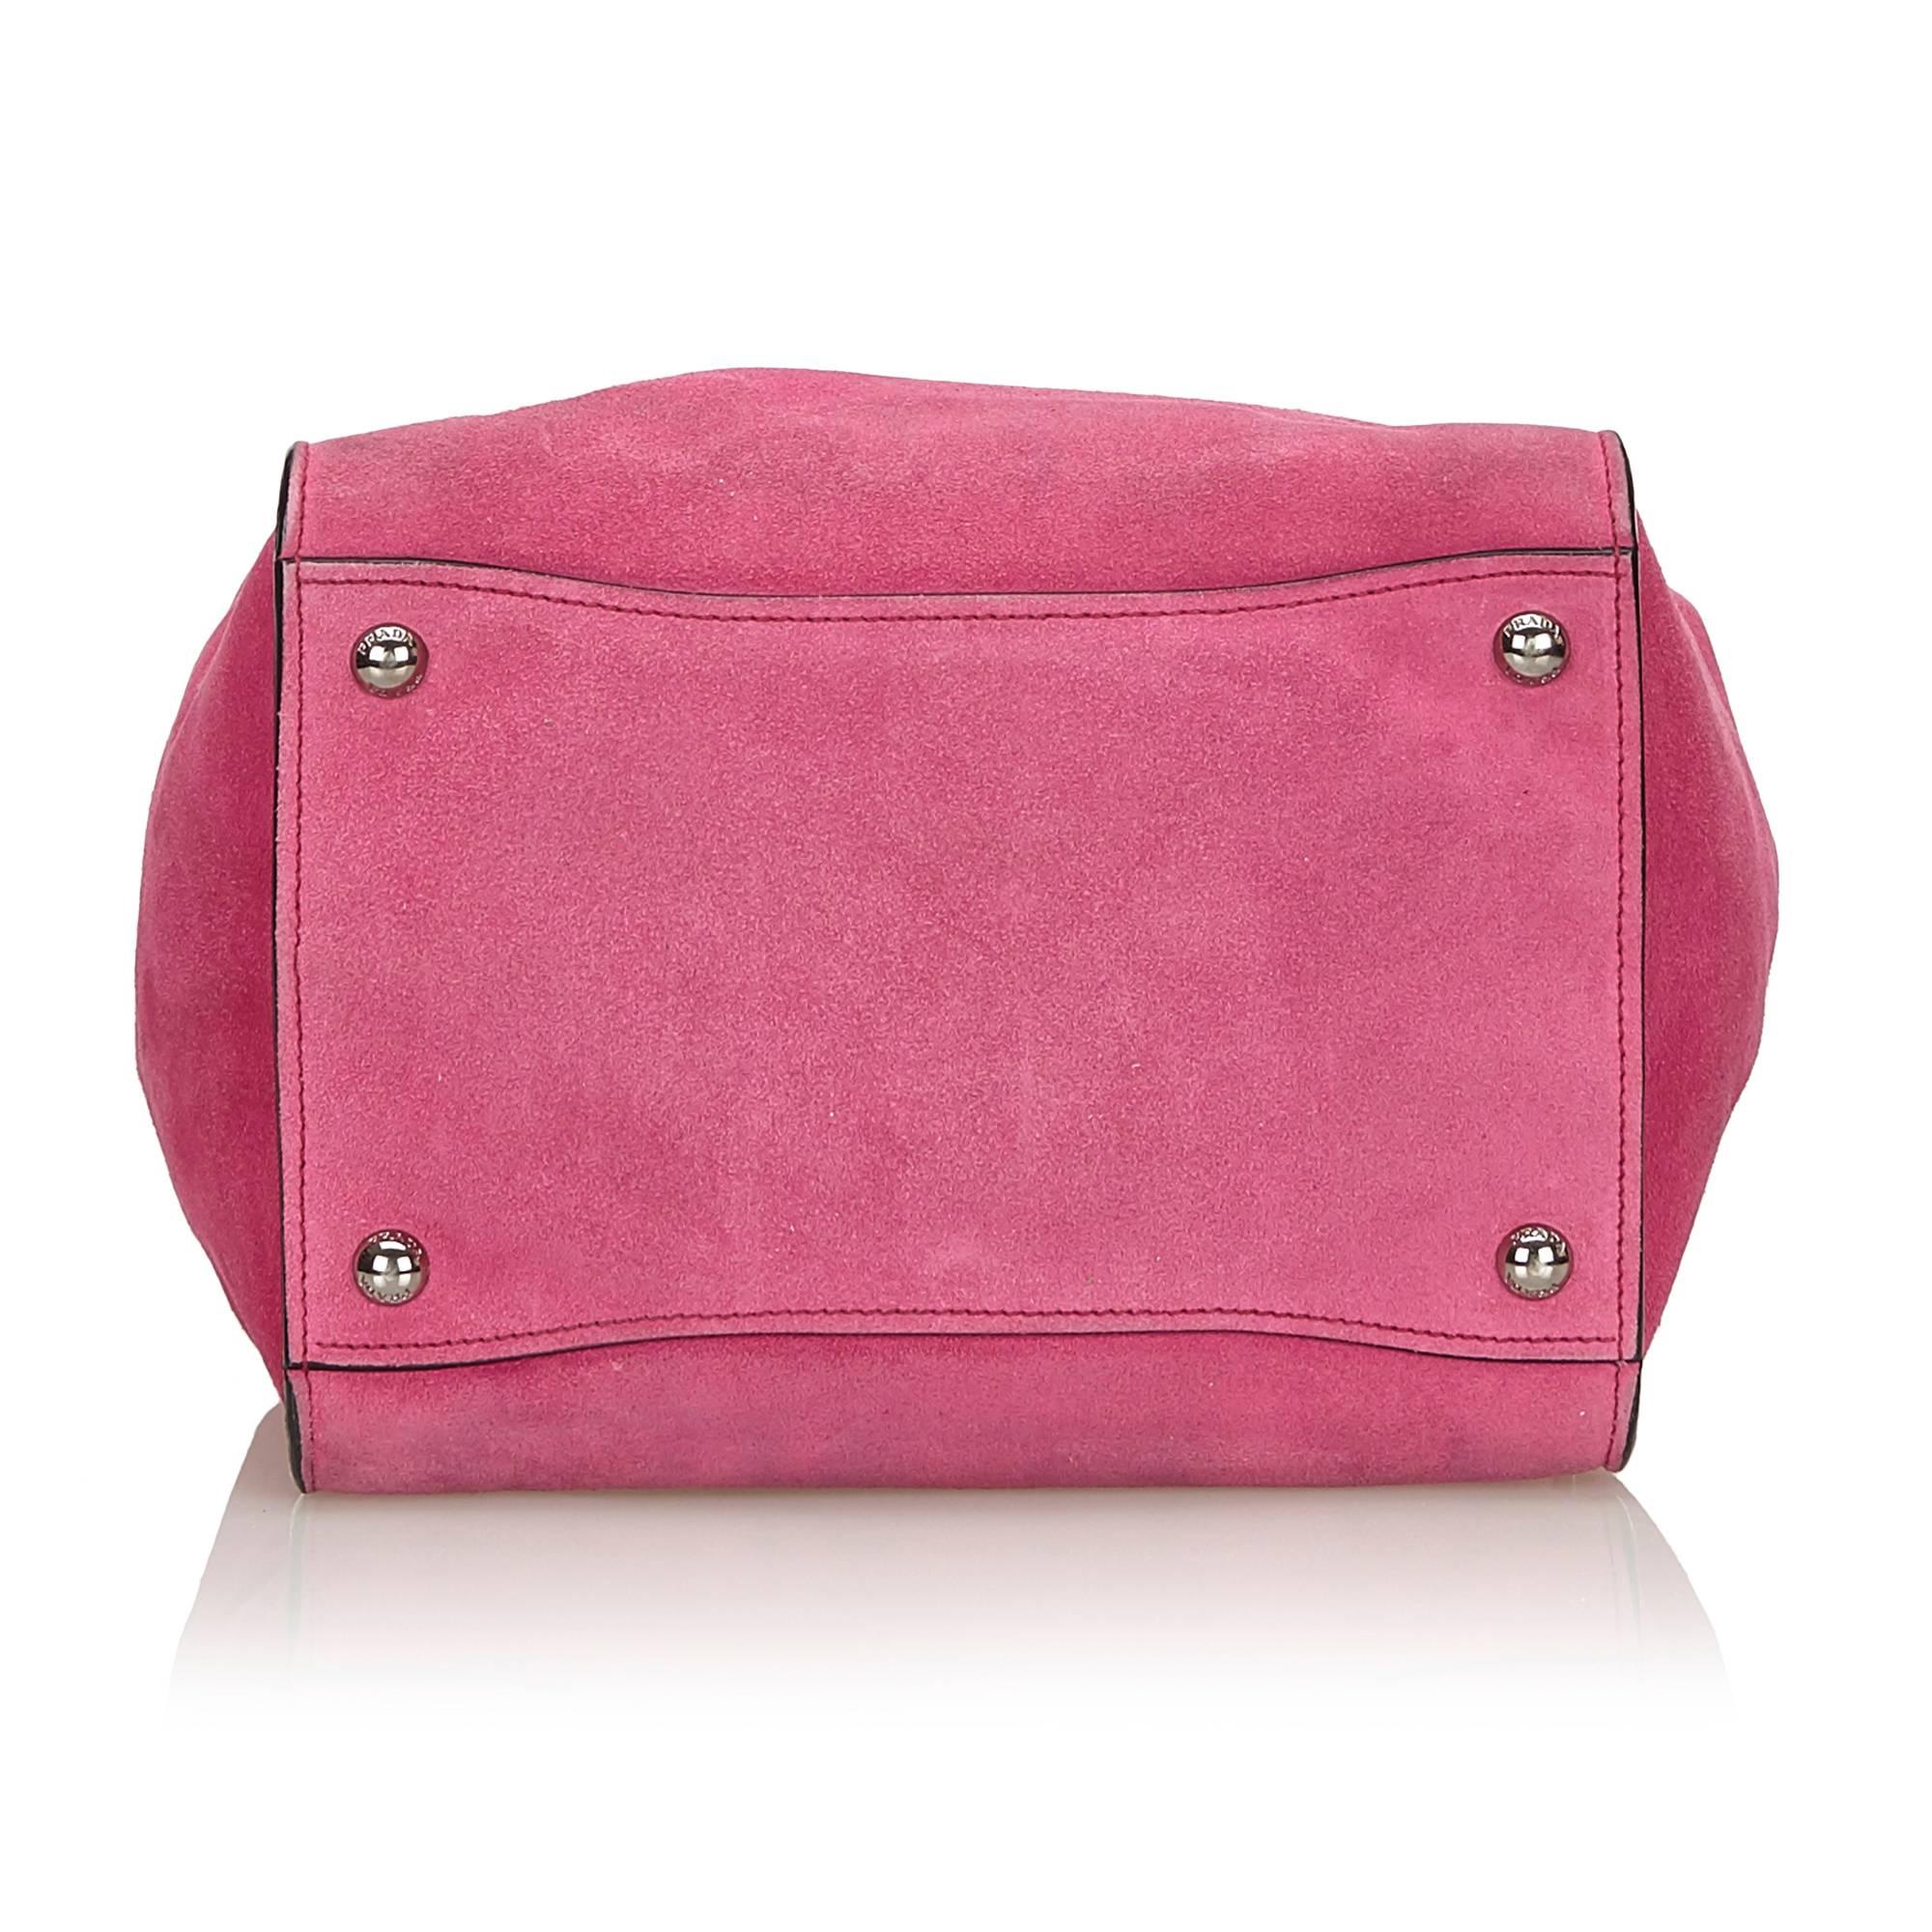 Prada Pink Suede Twin Pocket Tote In Good Condition For Sale In Orlando, FL